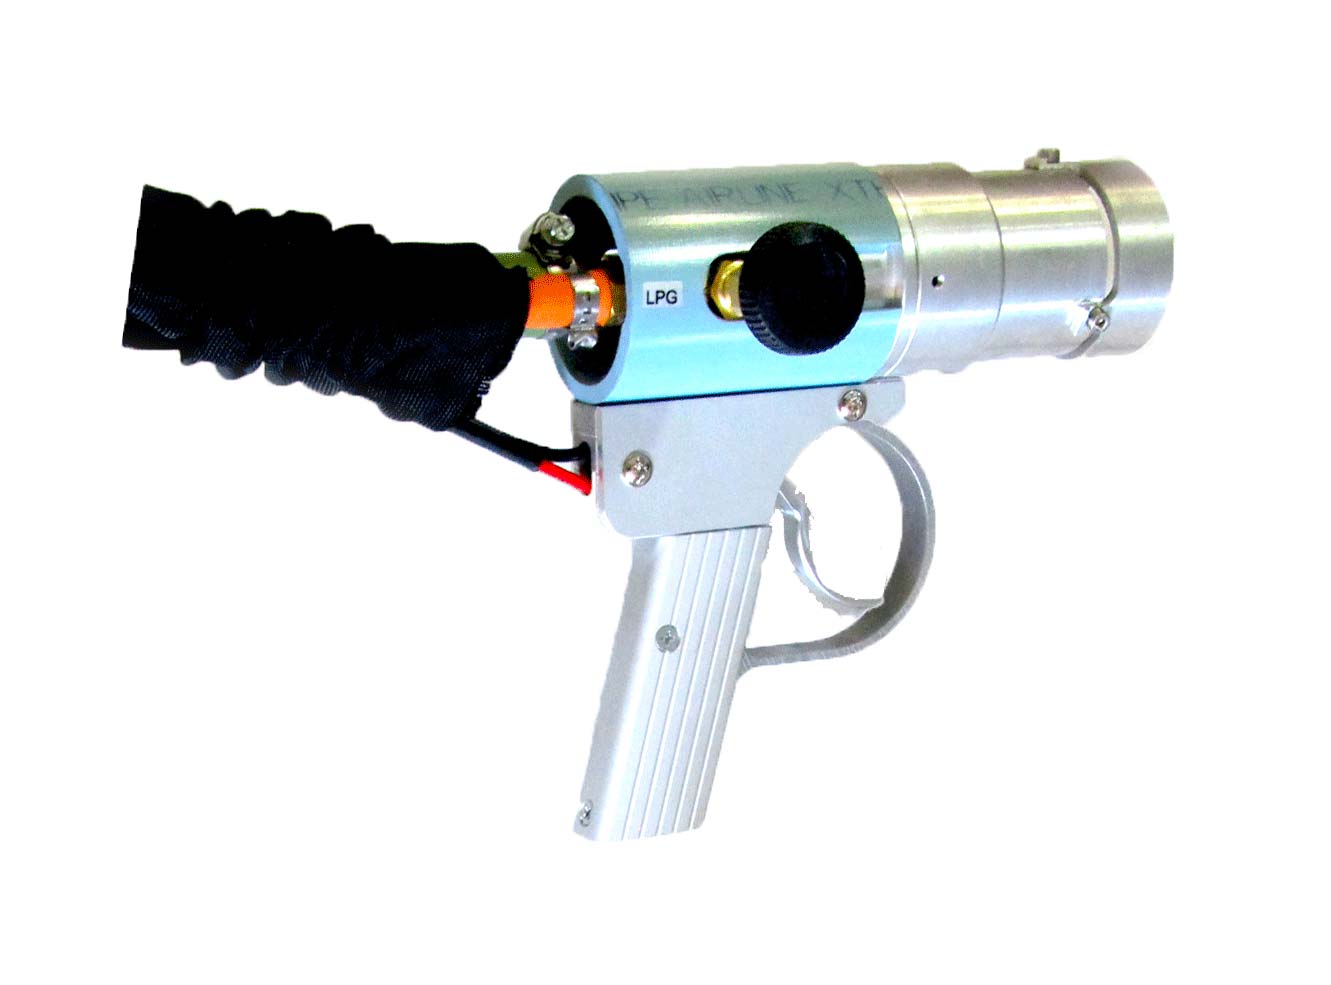 Small gun: suitable for smaller diameter pipe joints and for repairs and touch ups.